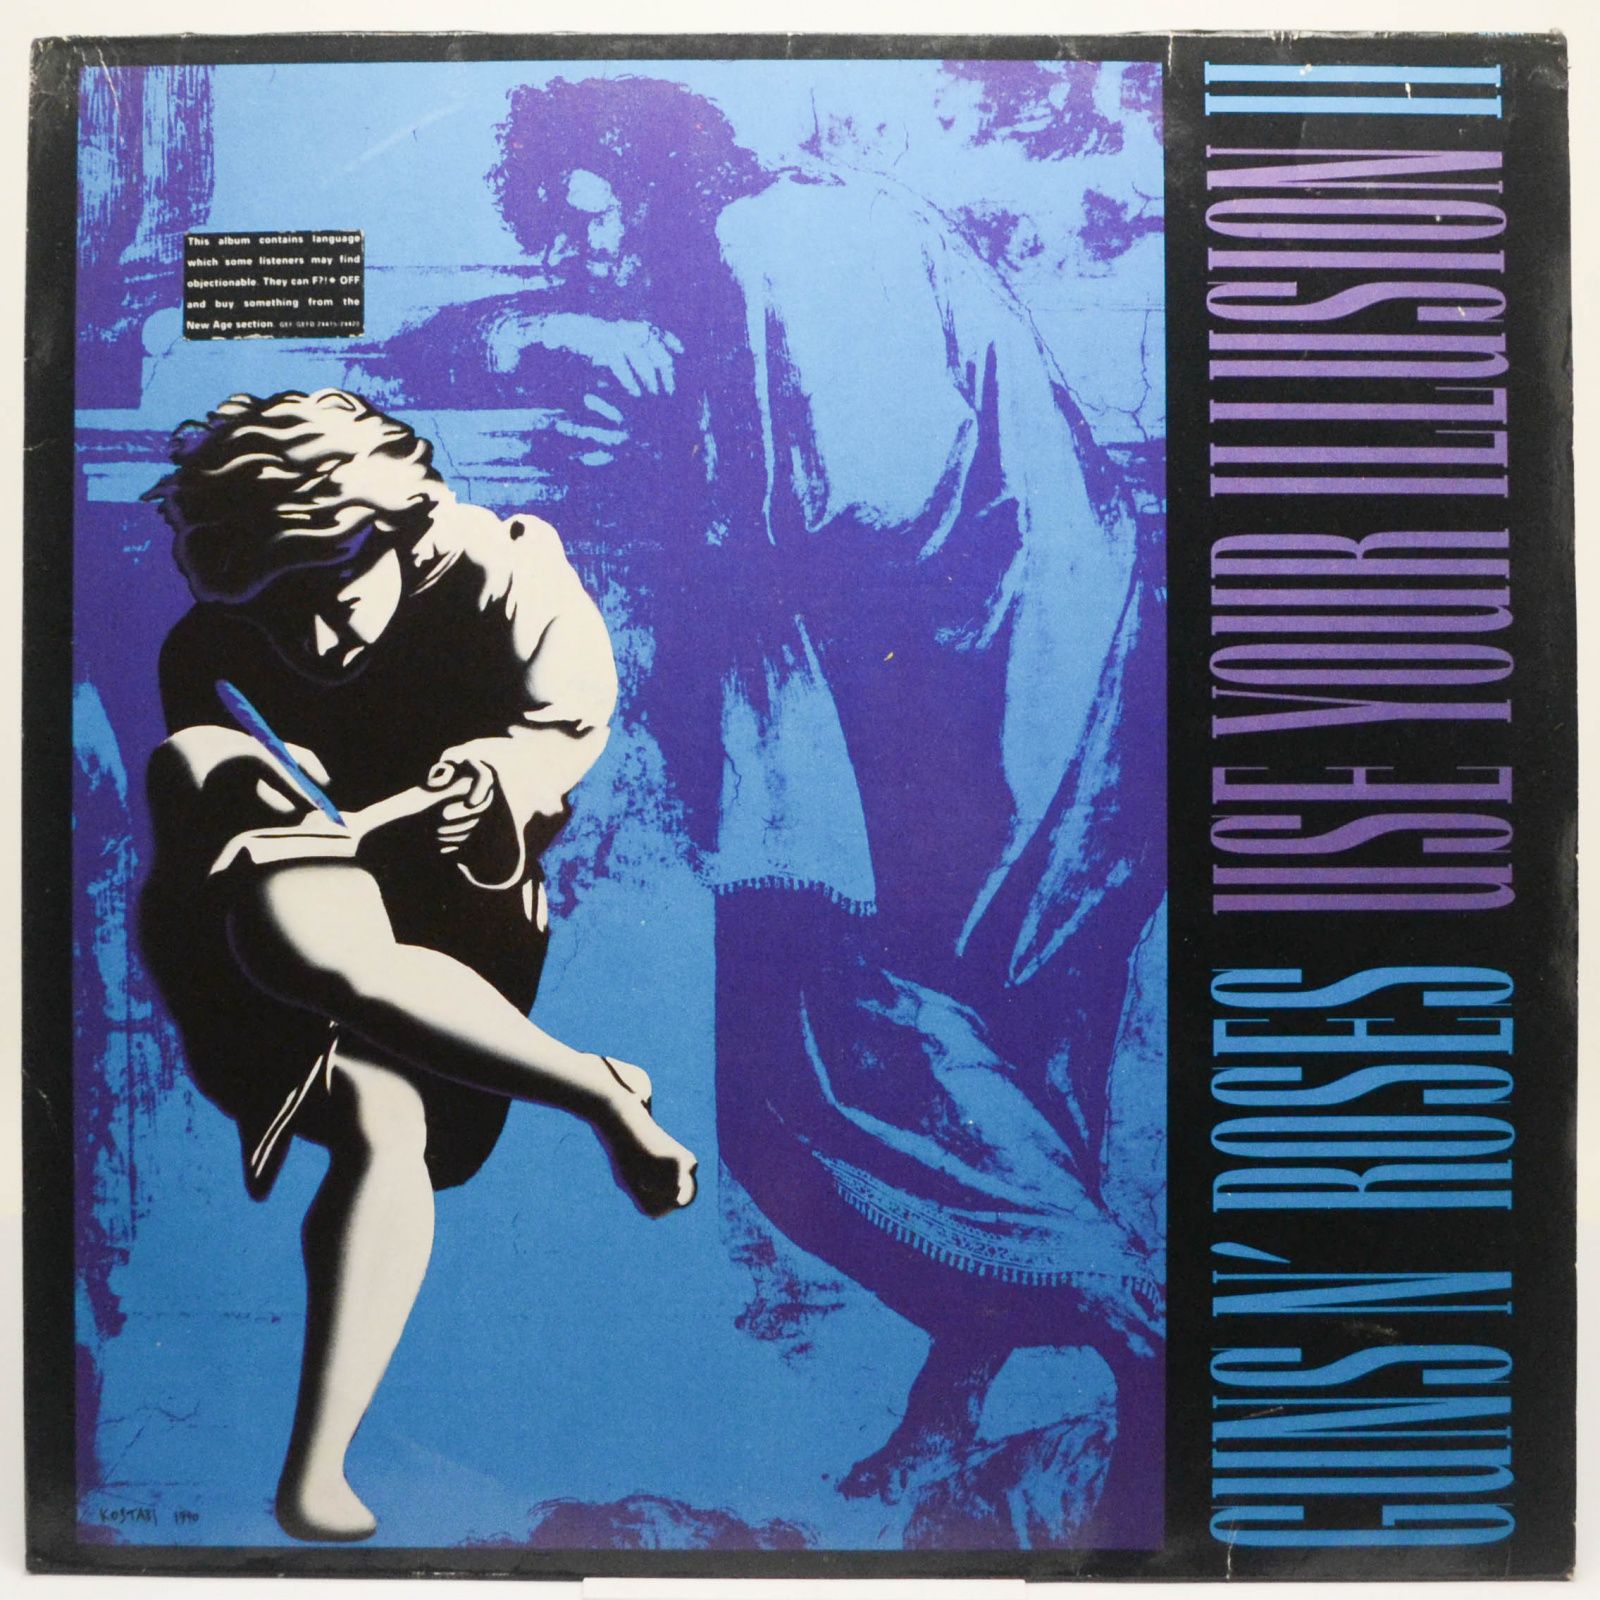 Use Your Illusion II (2LP), 1991